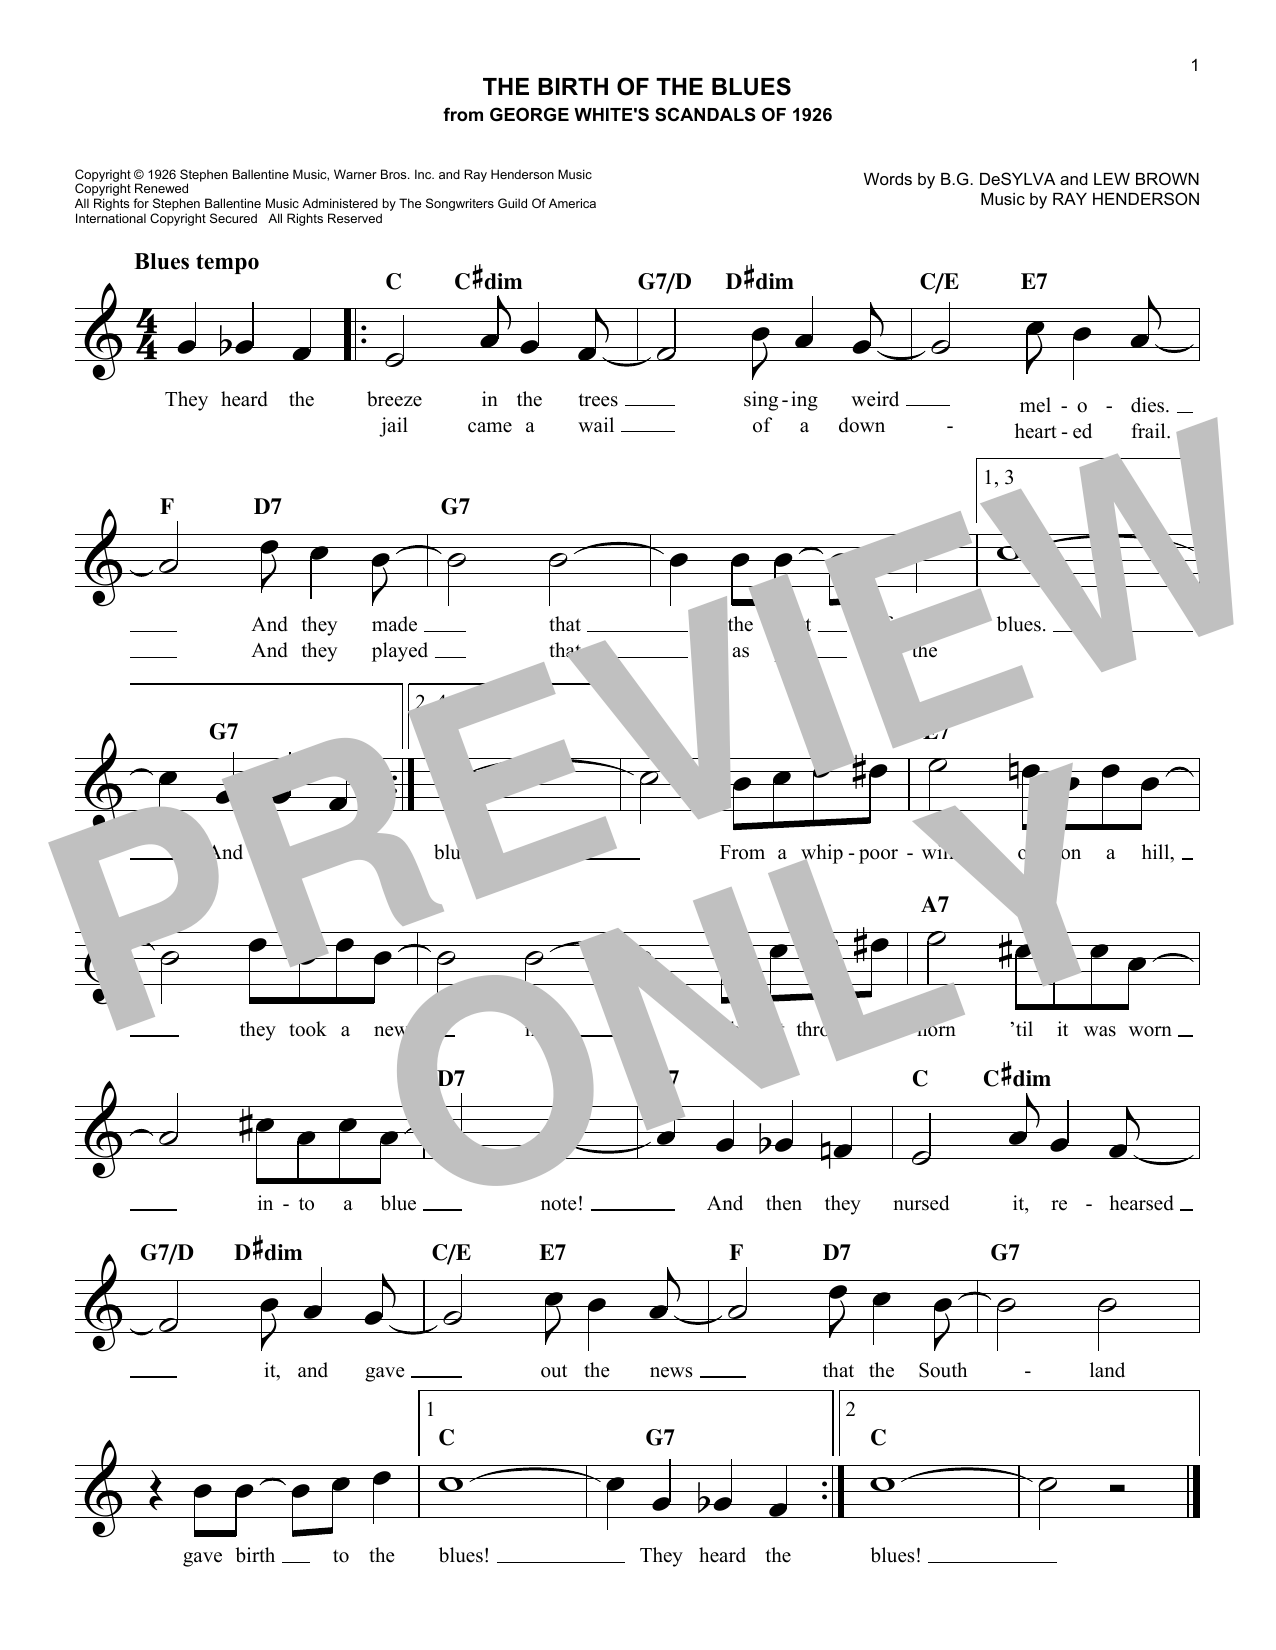 Ray Henderson The Birth Of The Blues Sheet Music Notes Download Printable Pdf Score 196341 2296